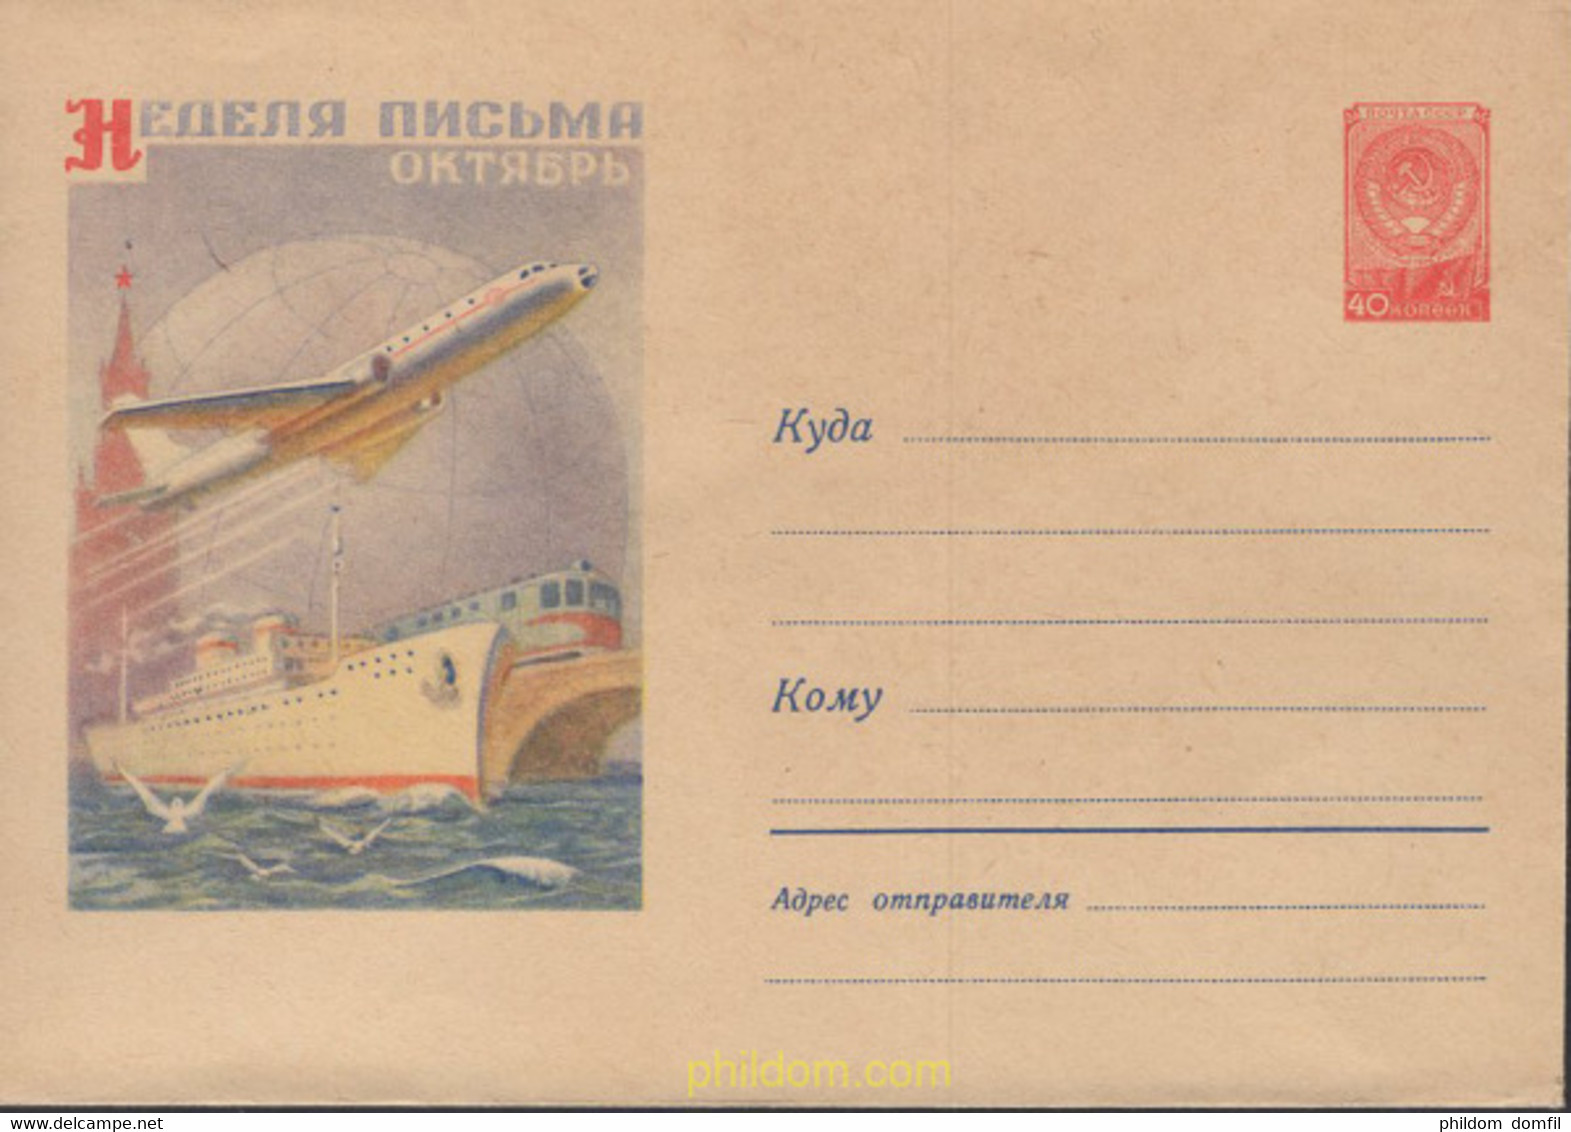 664757 MNH UNION SOVIETICA 1958 TRANSPORTES - Collections